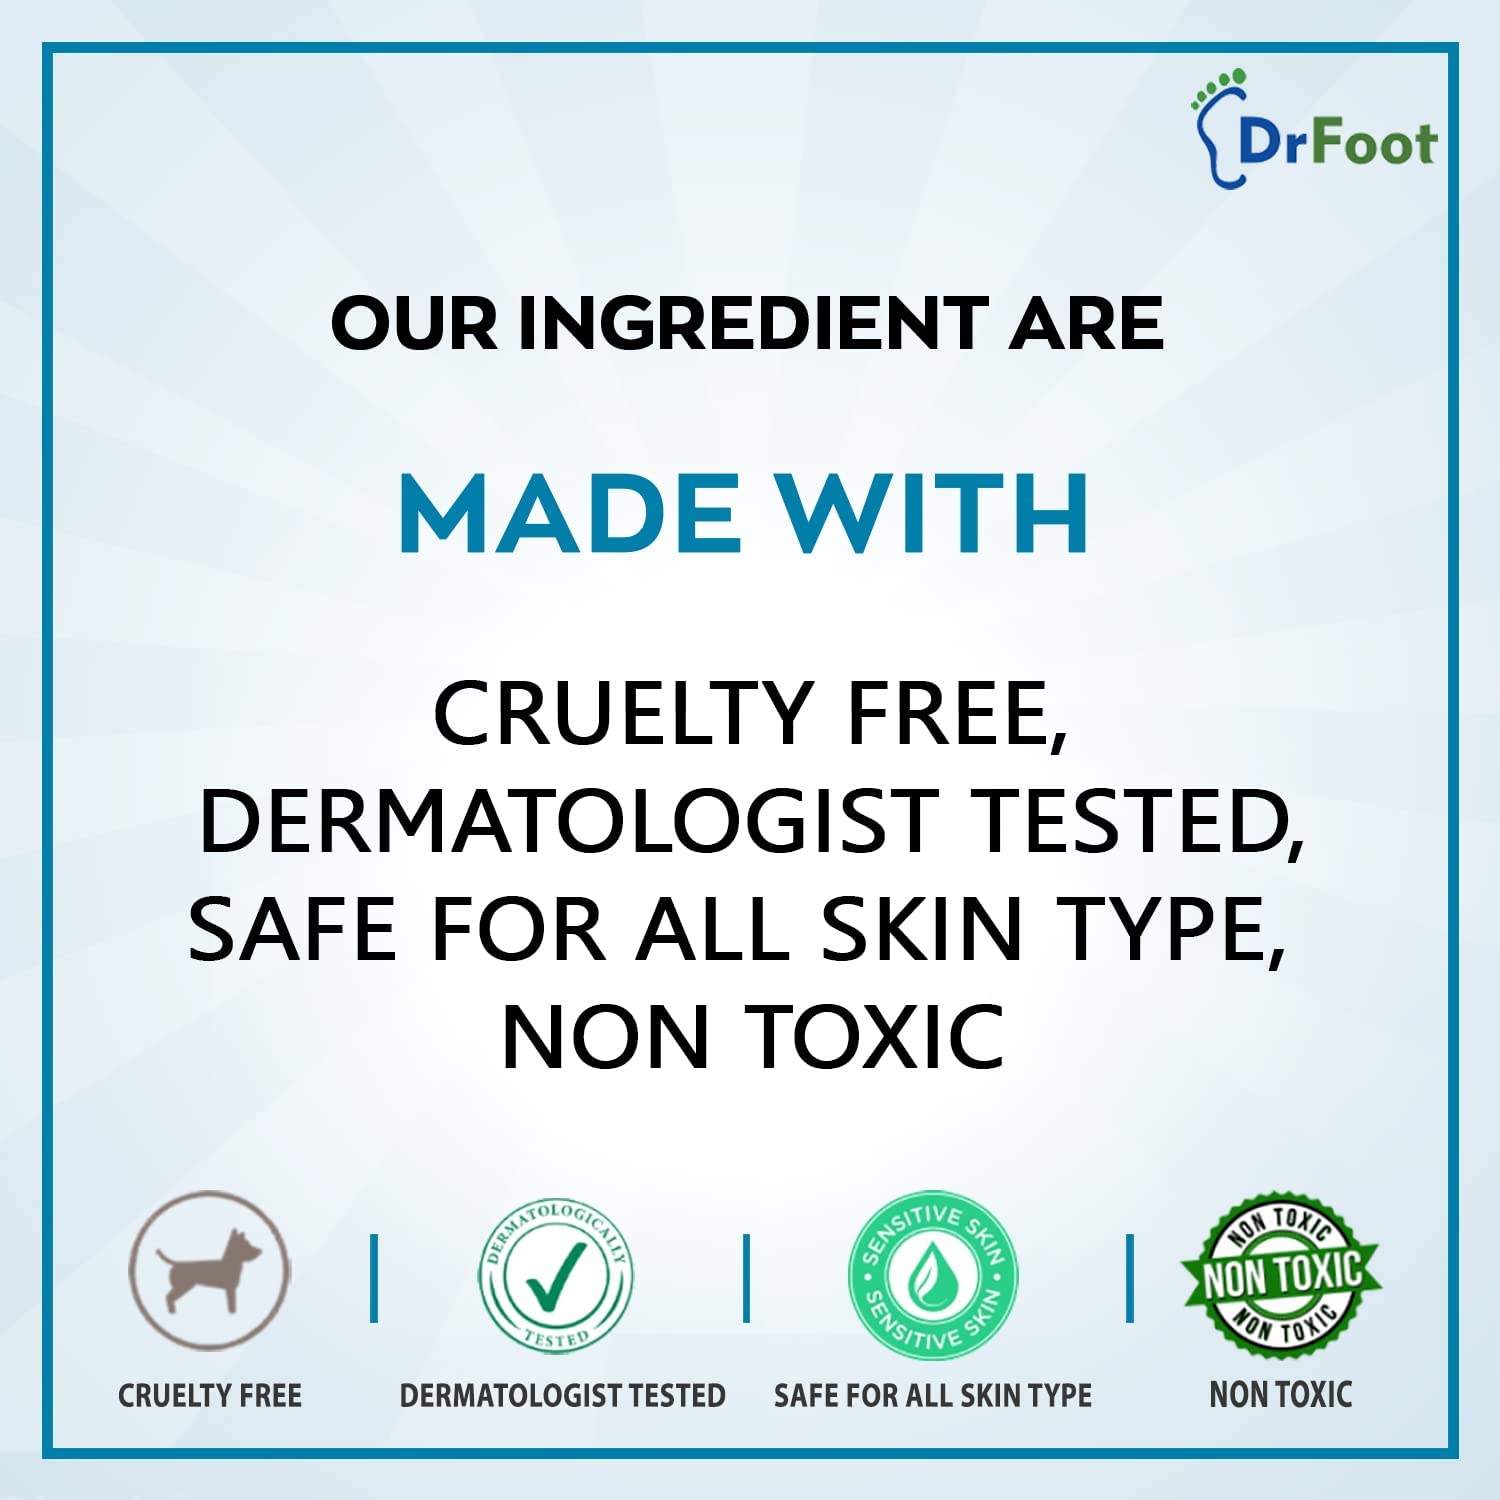 Dr Foot Foot Scrub Soap Repair Dry Cracked Heels, Dead Skin & Calluses Remover with Almond & Pure Aloe Vera Extracts – 100gm (Pack of 2)